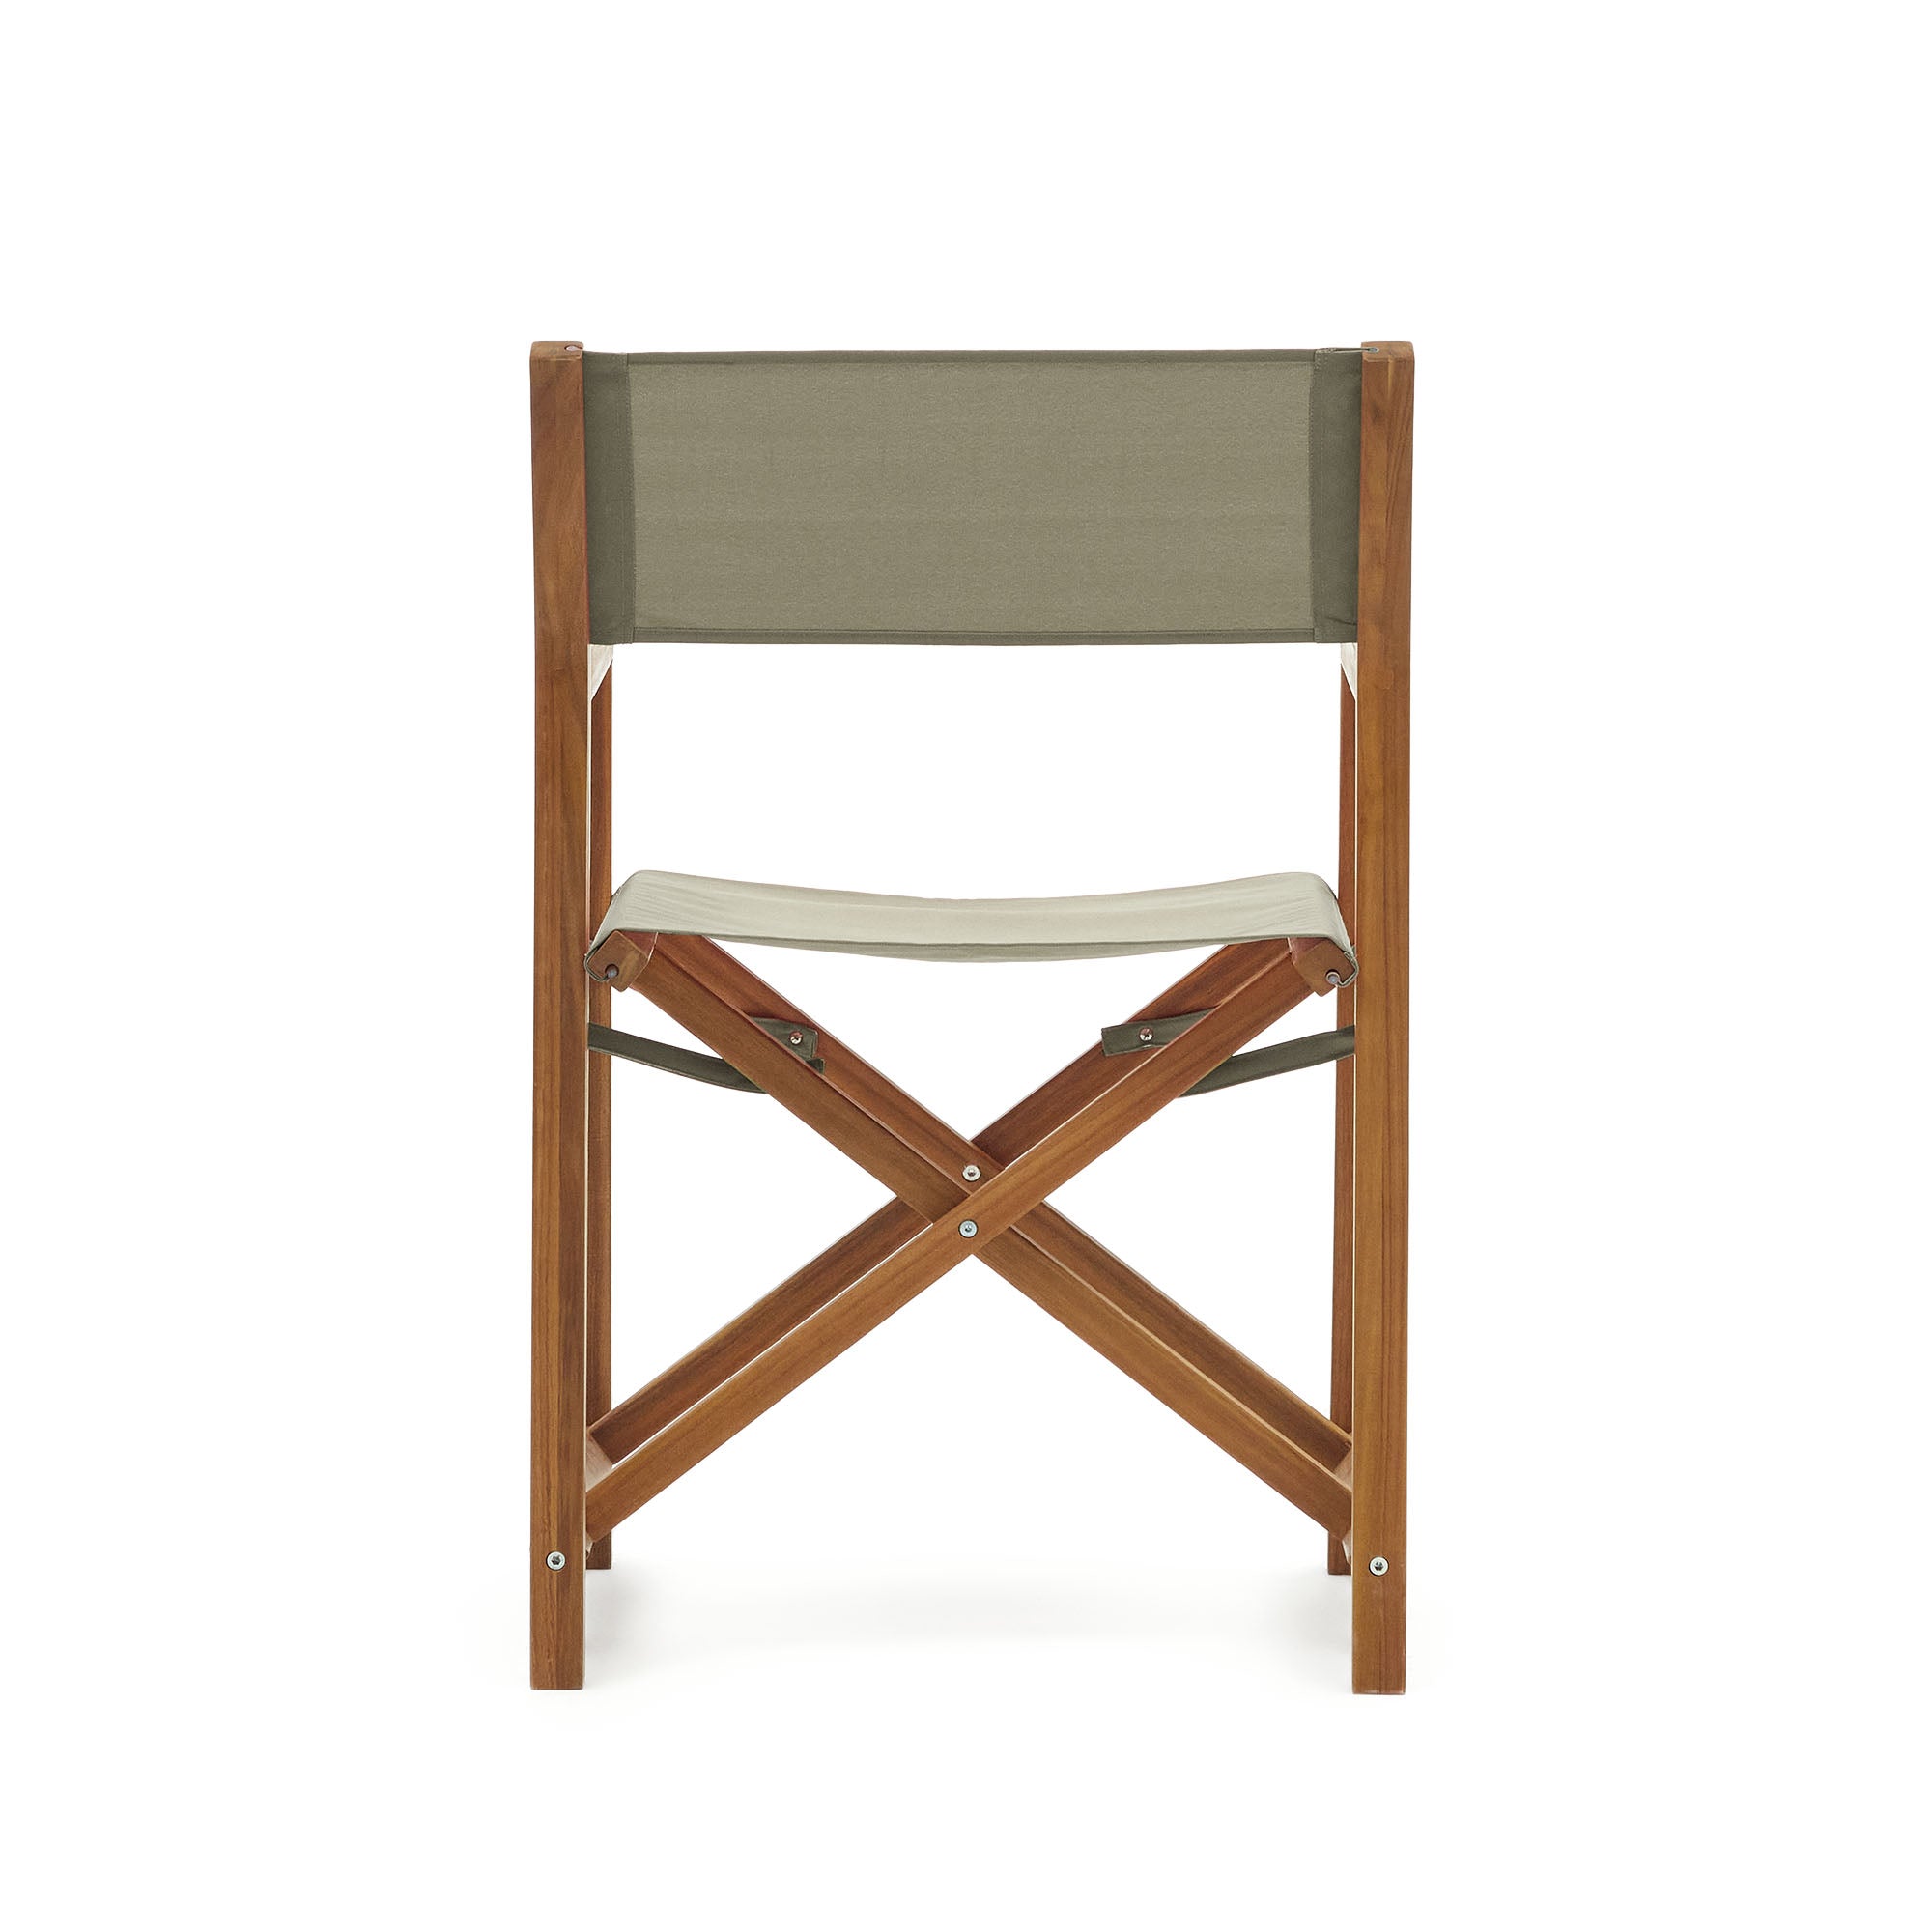 Thianna folding outdoor chair in green with solid acacia wood FSC 100%